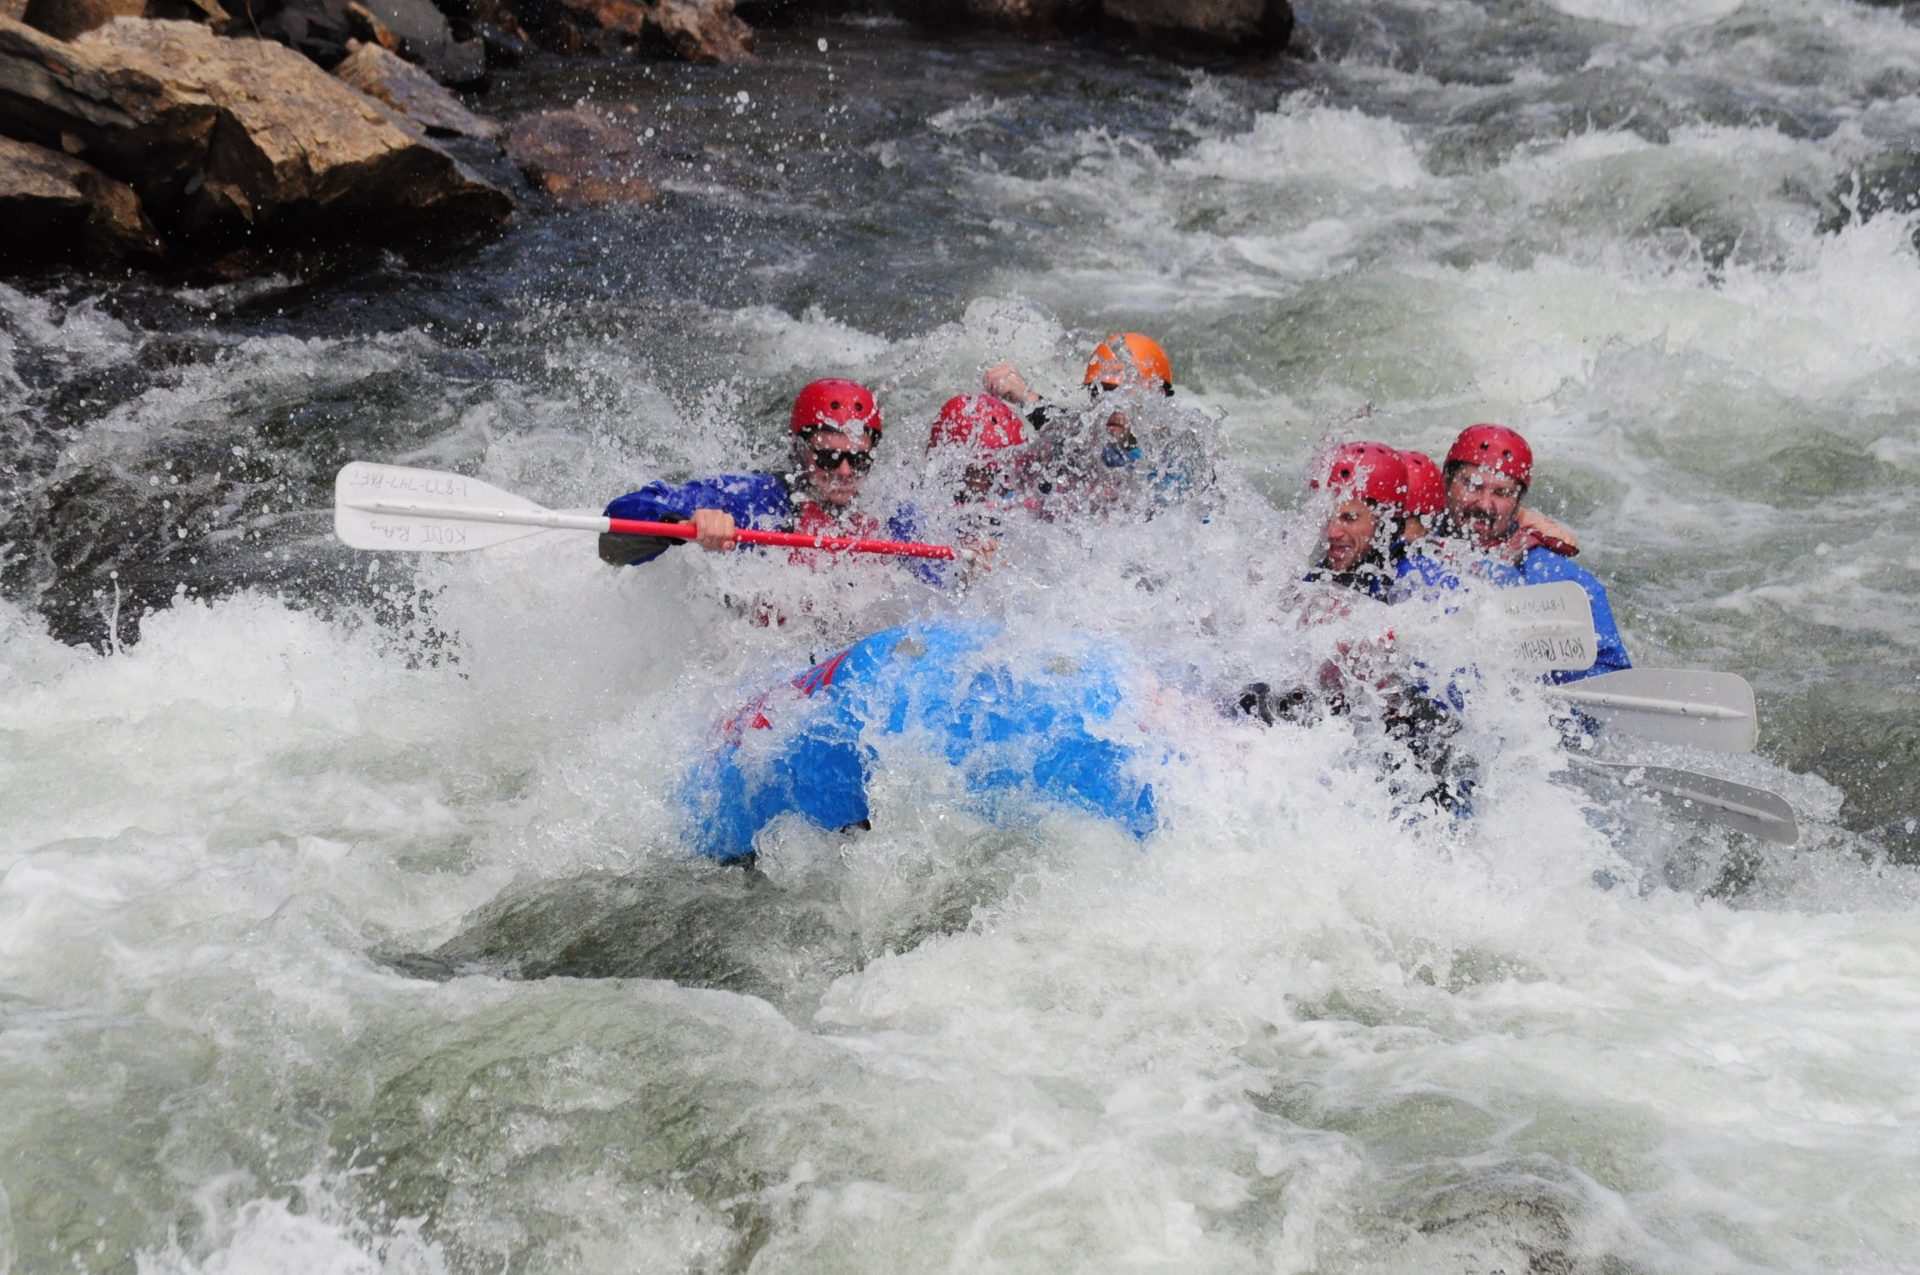 Tourists engaged in level 5 whitewater rafting in a fast stream